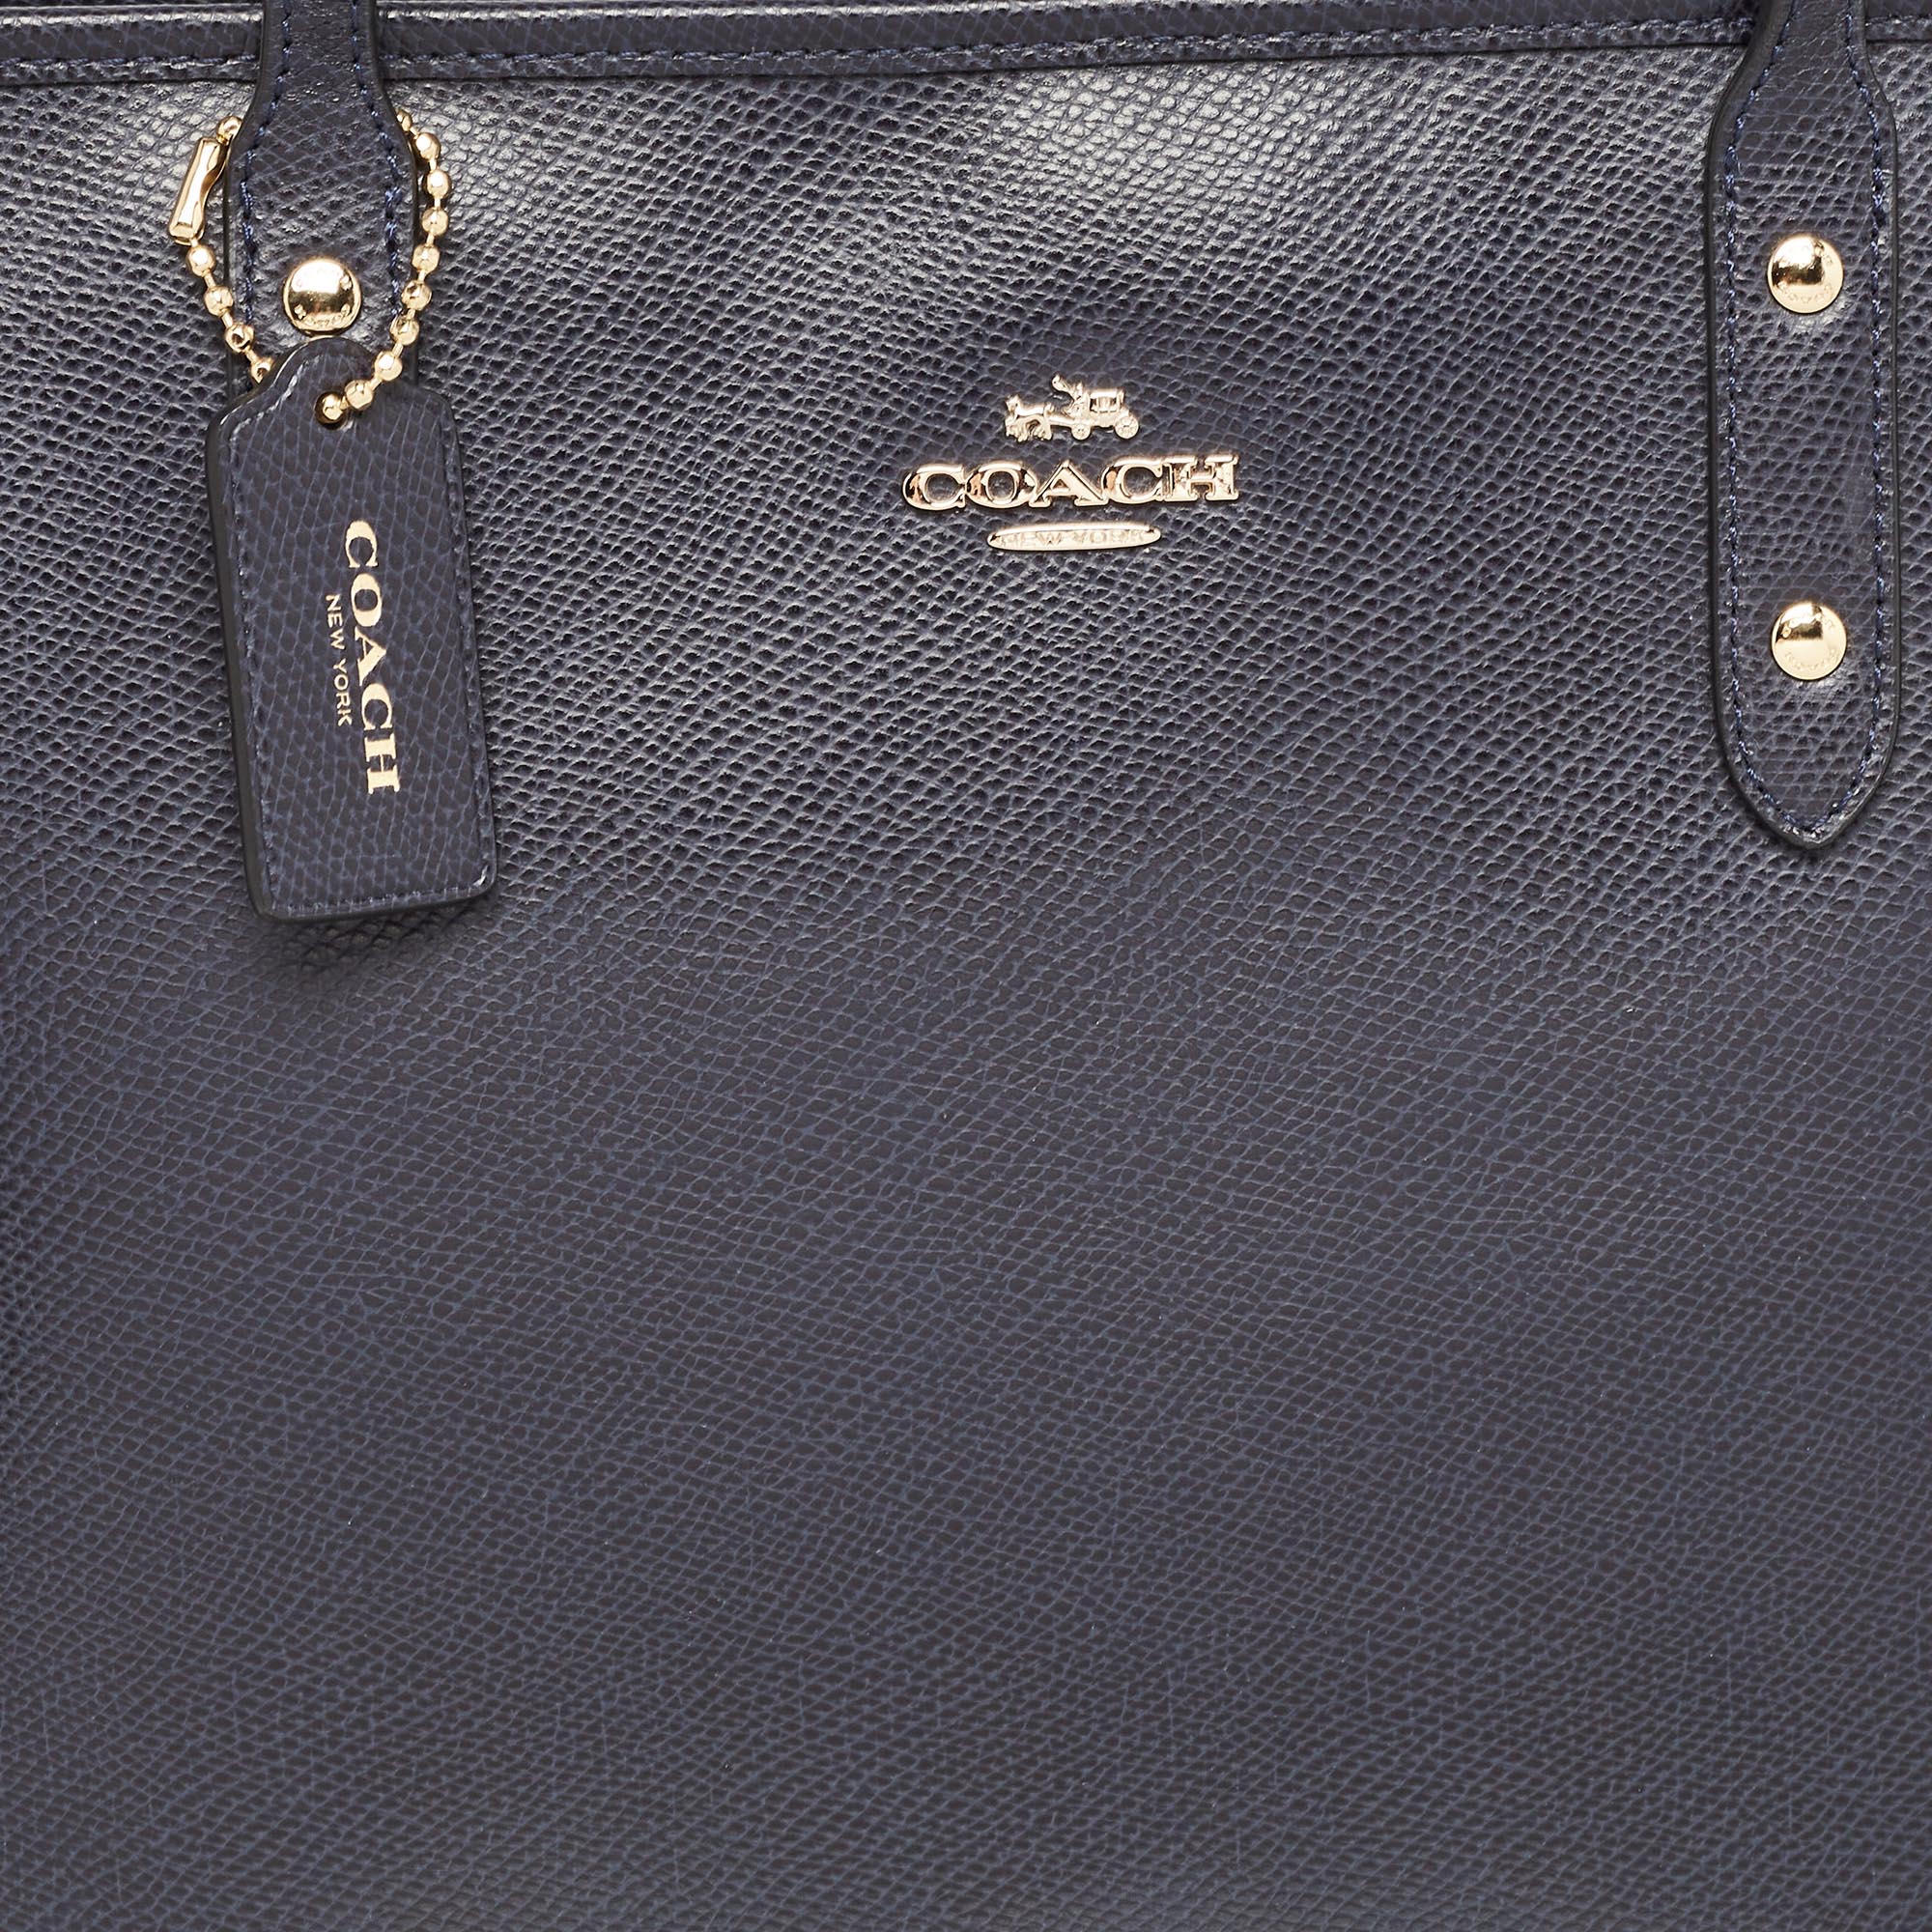 Coach Navy Blue Leather City Zip Tote